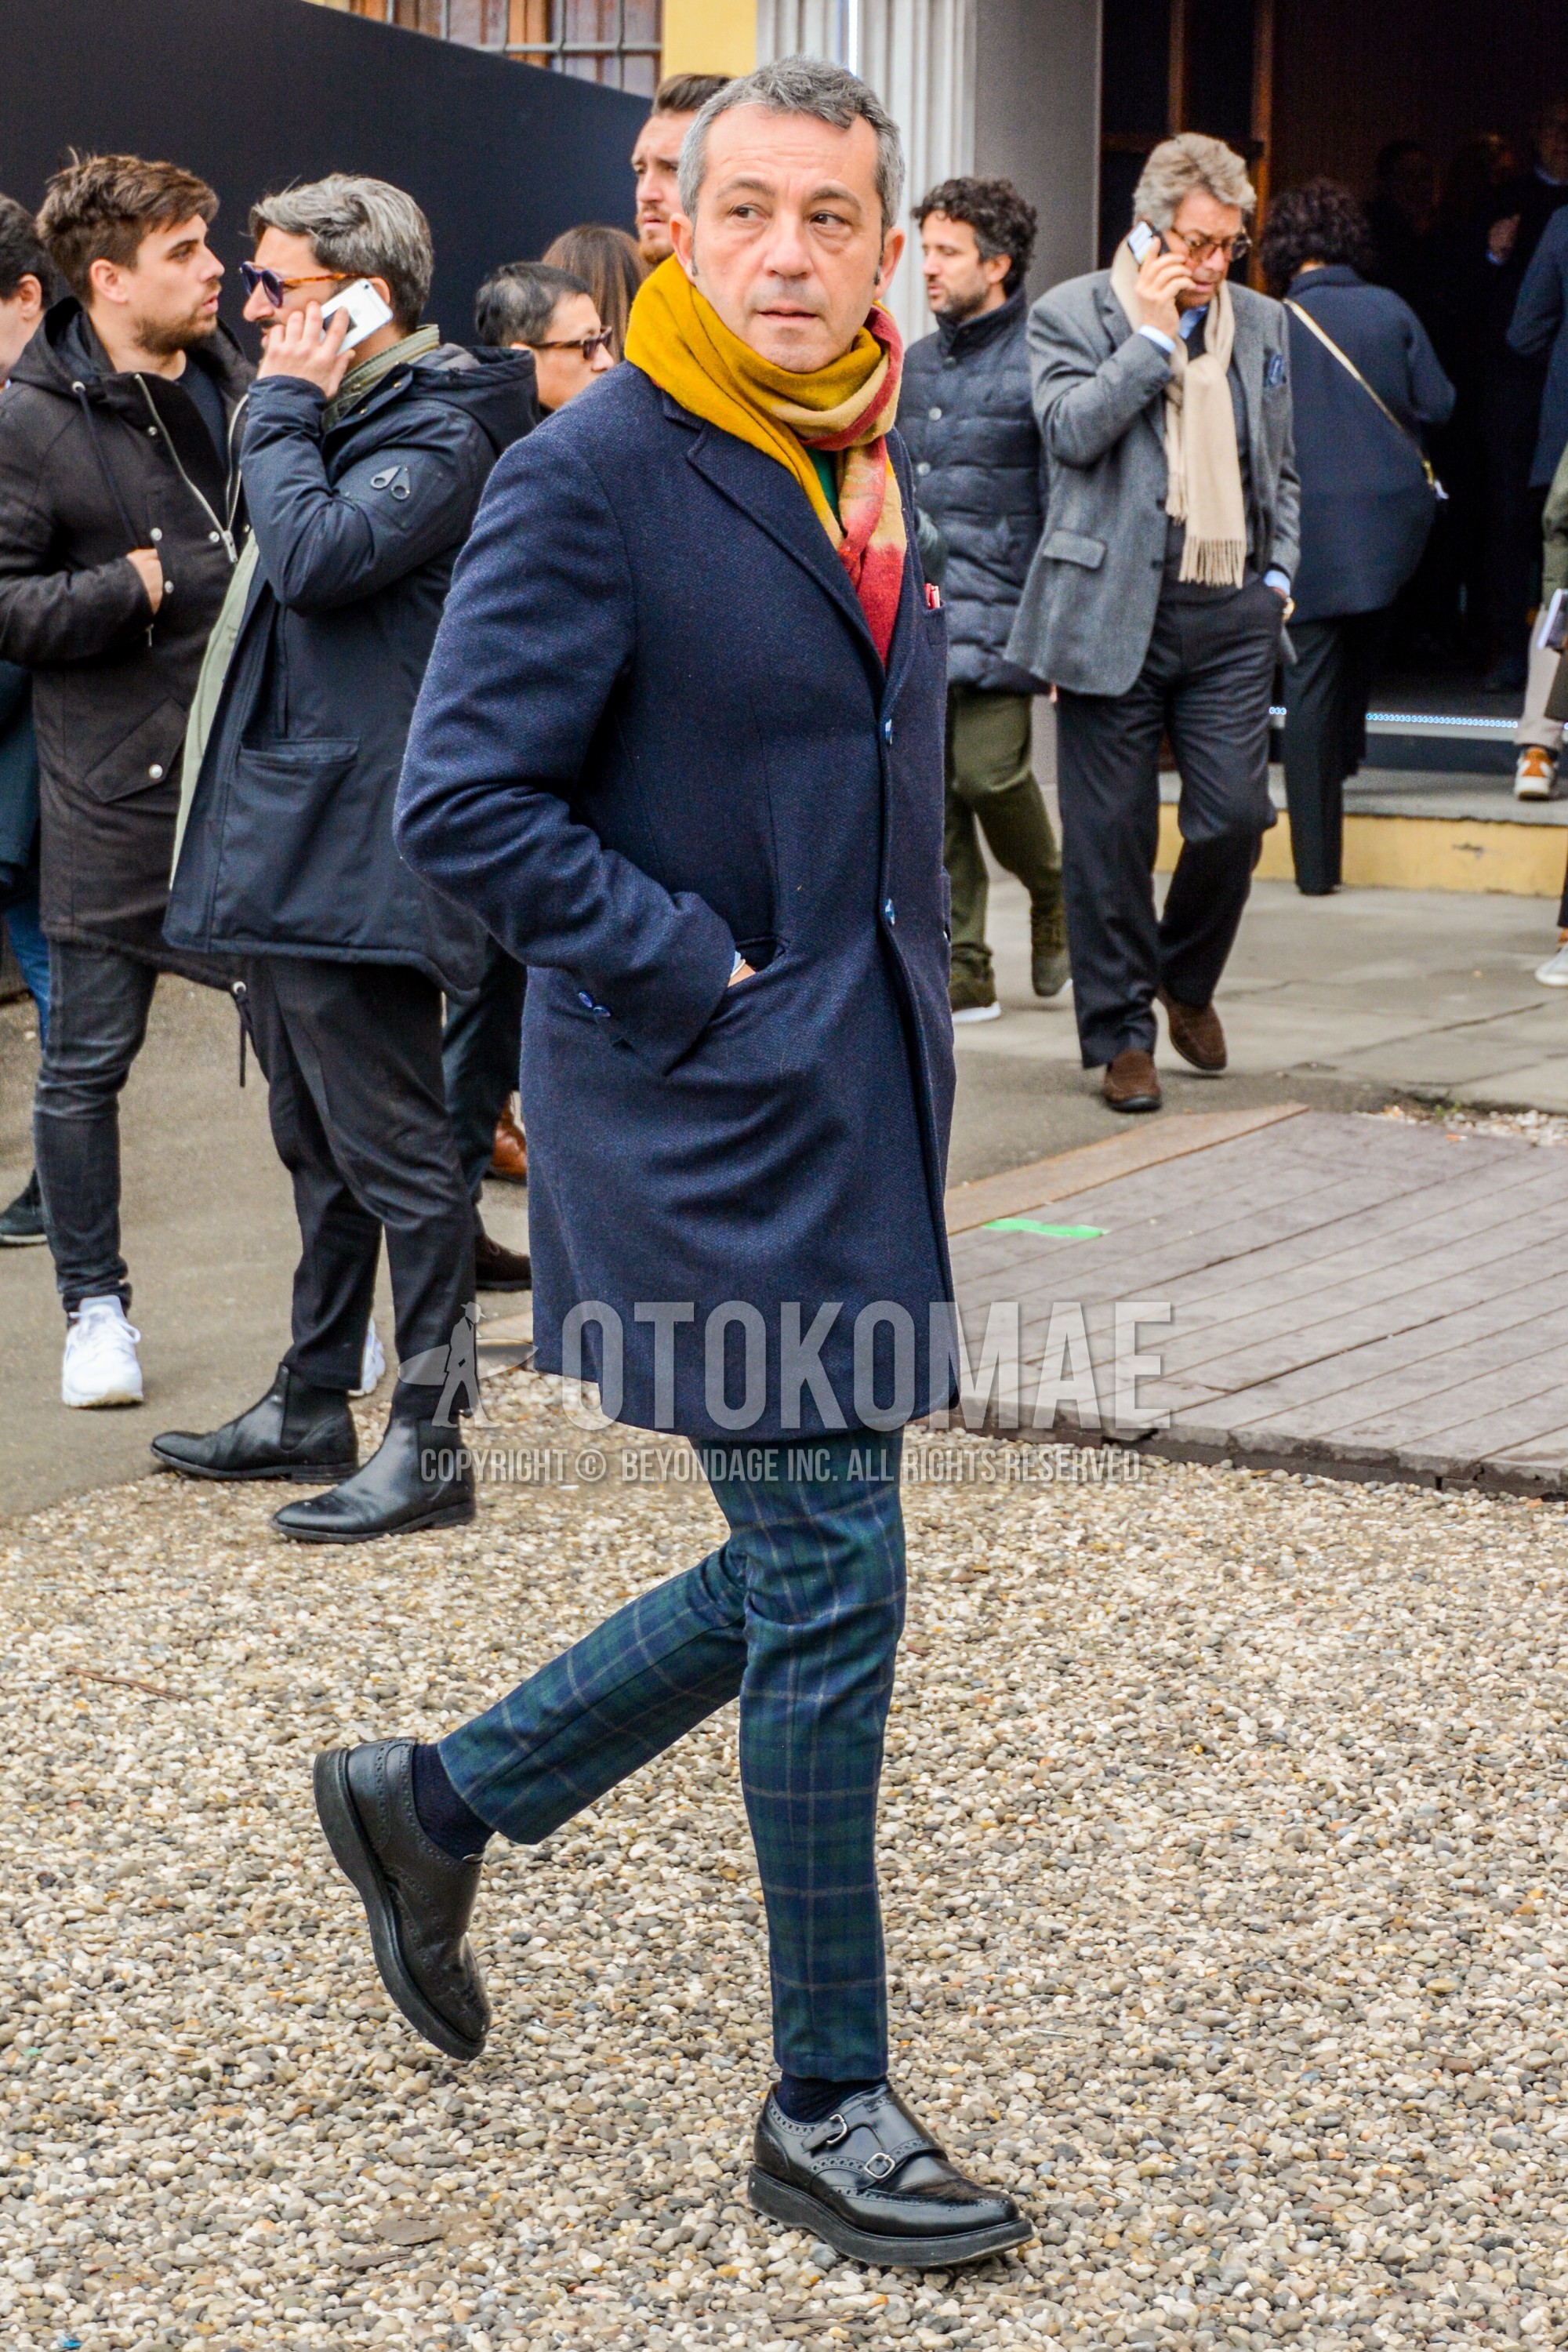 Men's autumn winter outfit with multi-color scarf scarf, gray plain chester coat, olive green navy check slacks, navy plain socks, black monk shoes leather shoes.